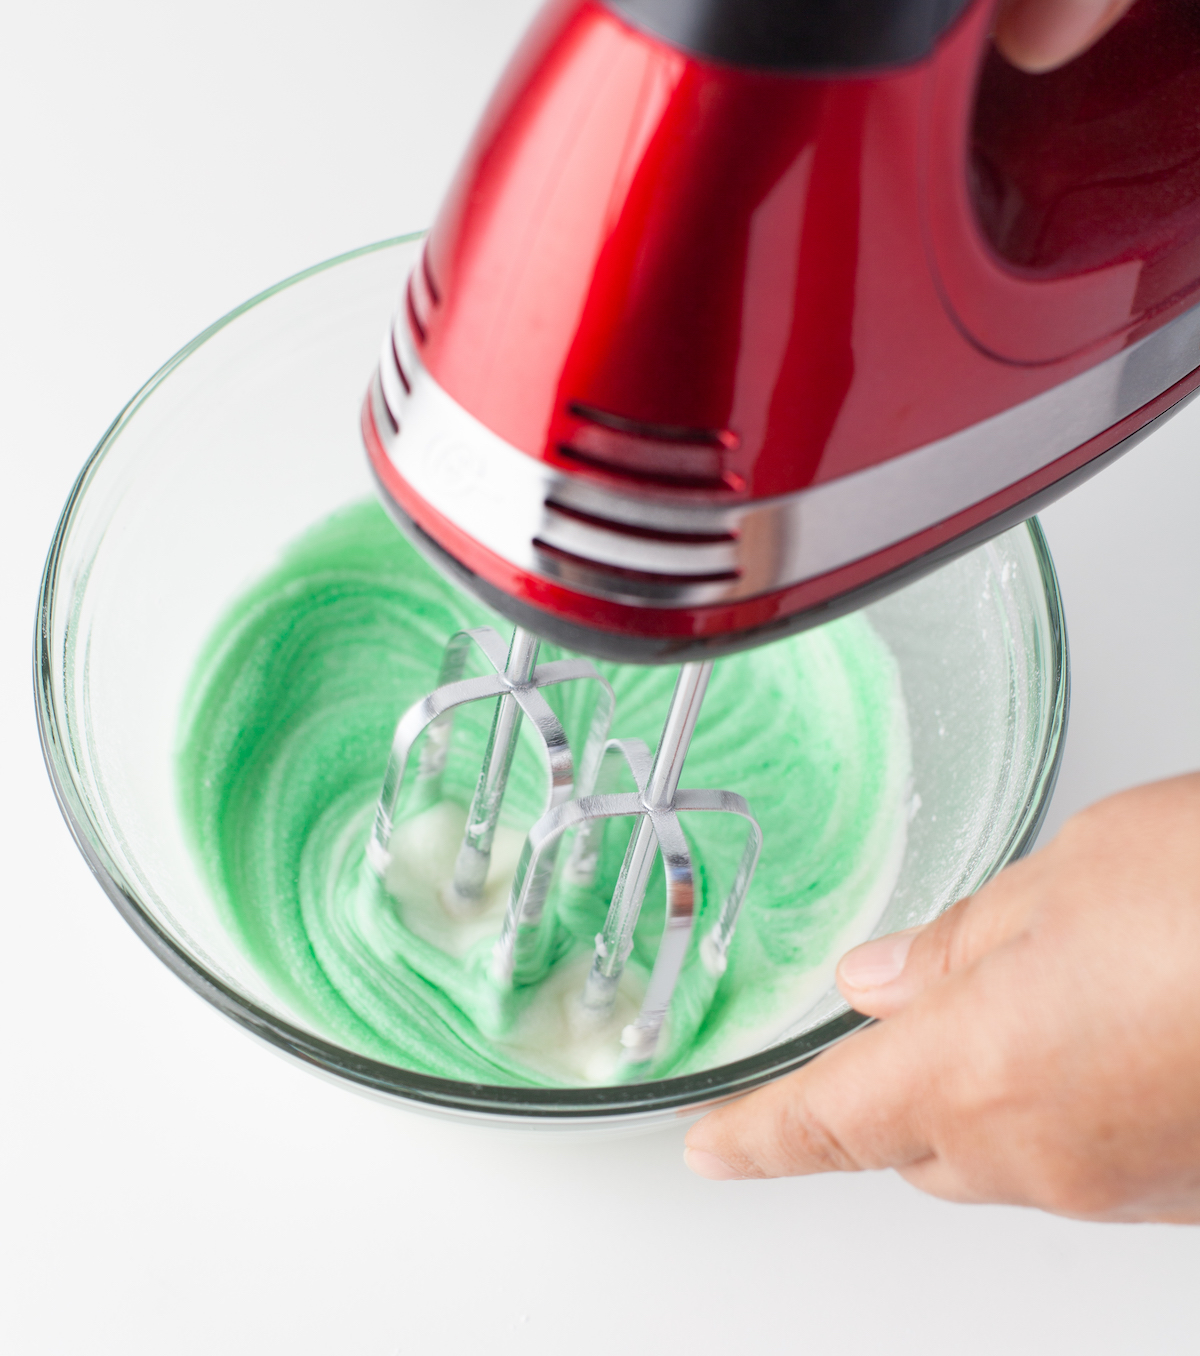 Adding green food coloring to the frosting mixture